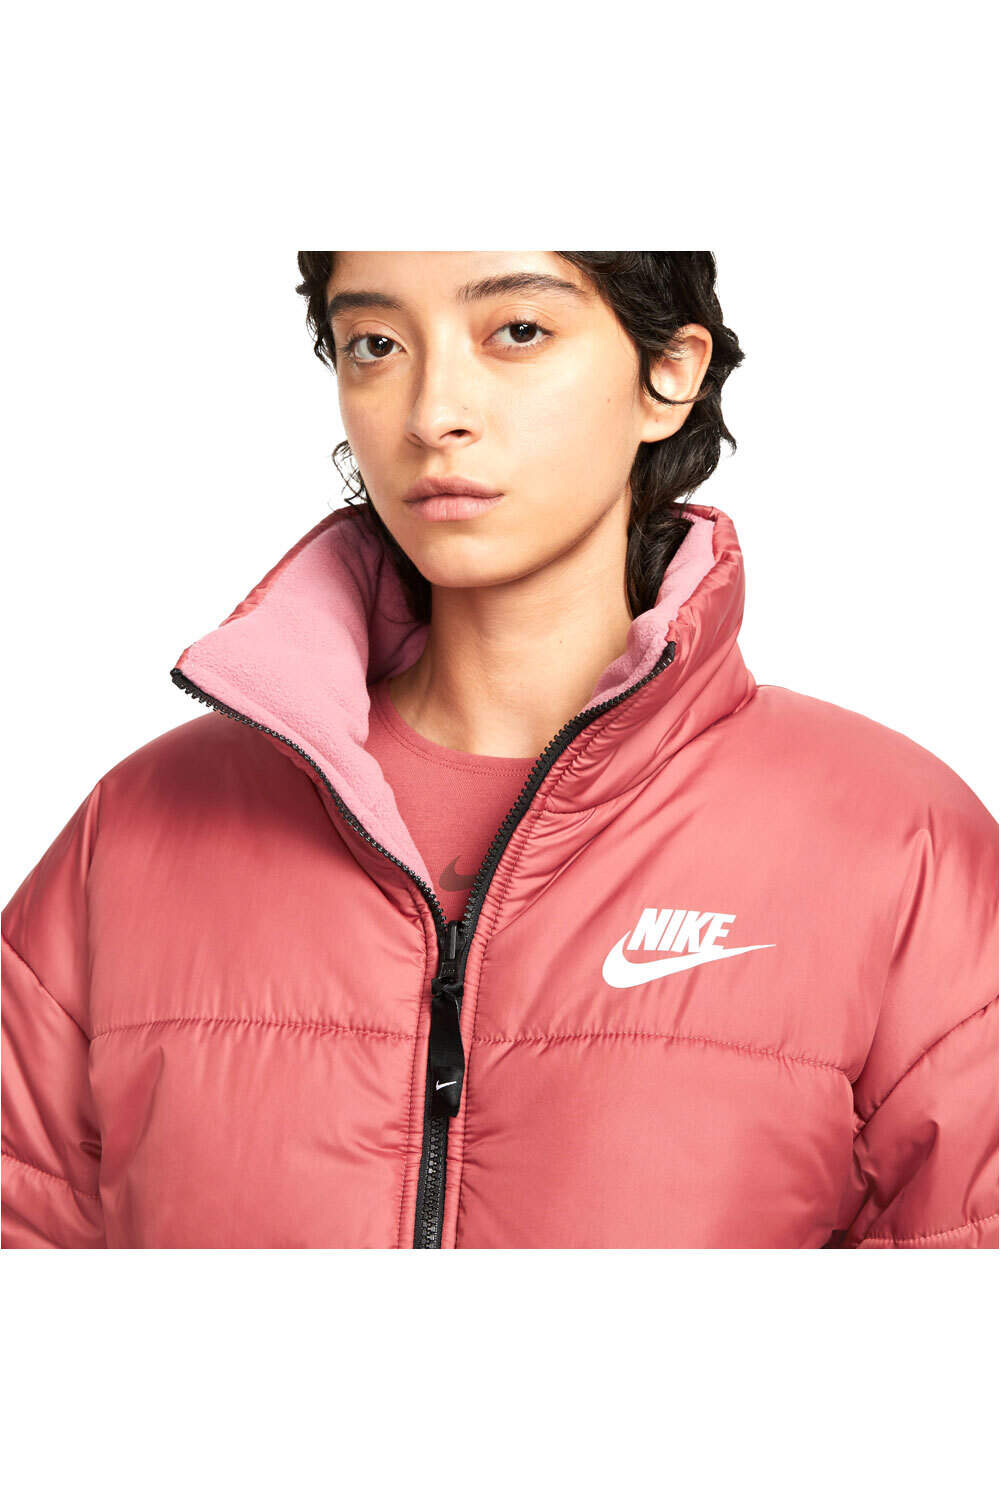 Nike chaquetas mujer NSW TF RPL CLSSC HD JKT 03